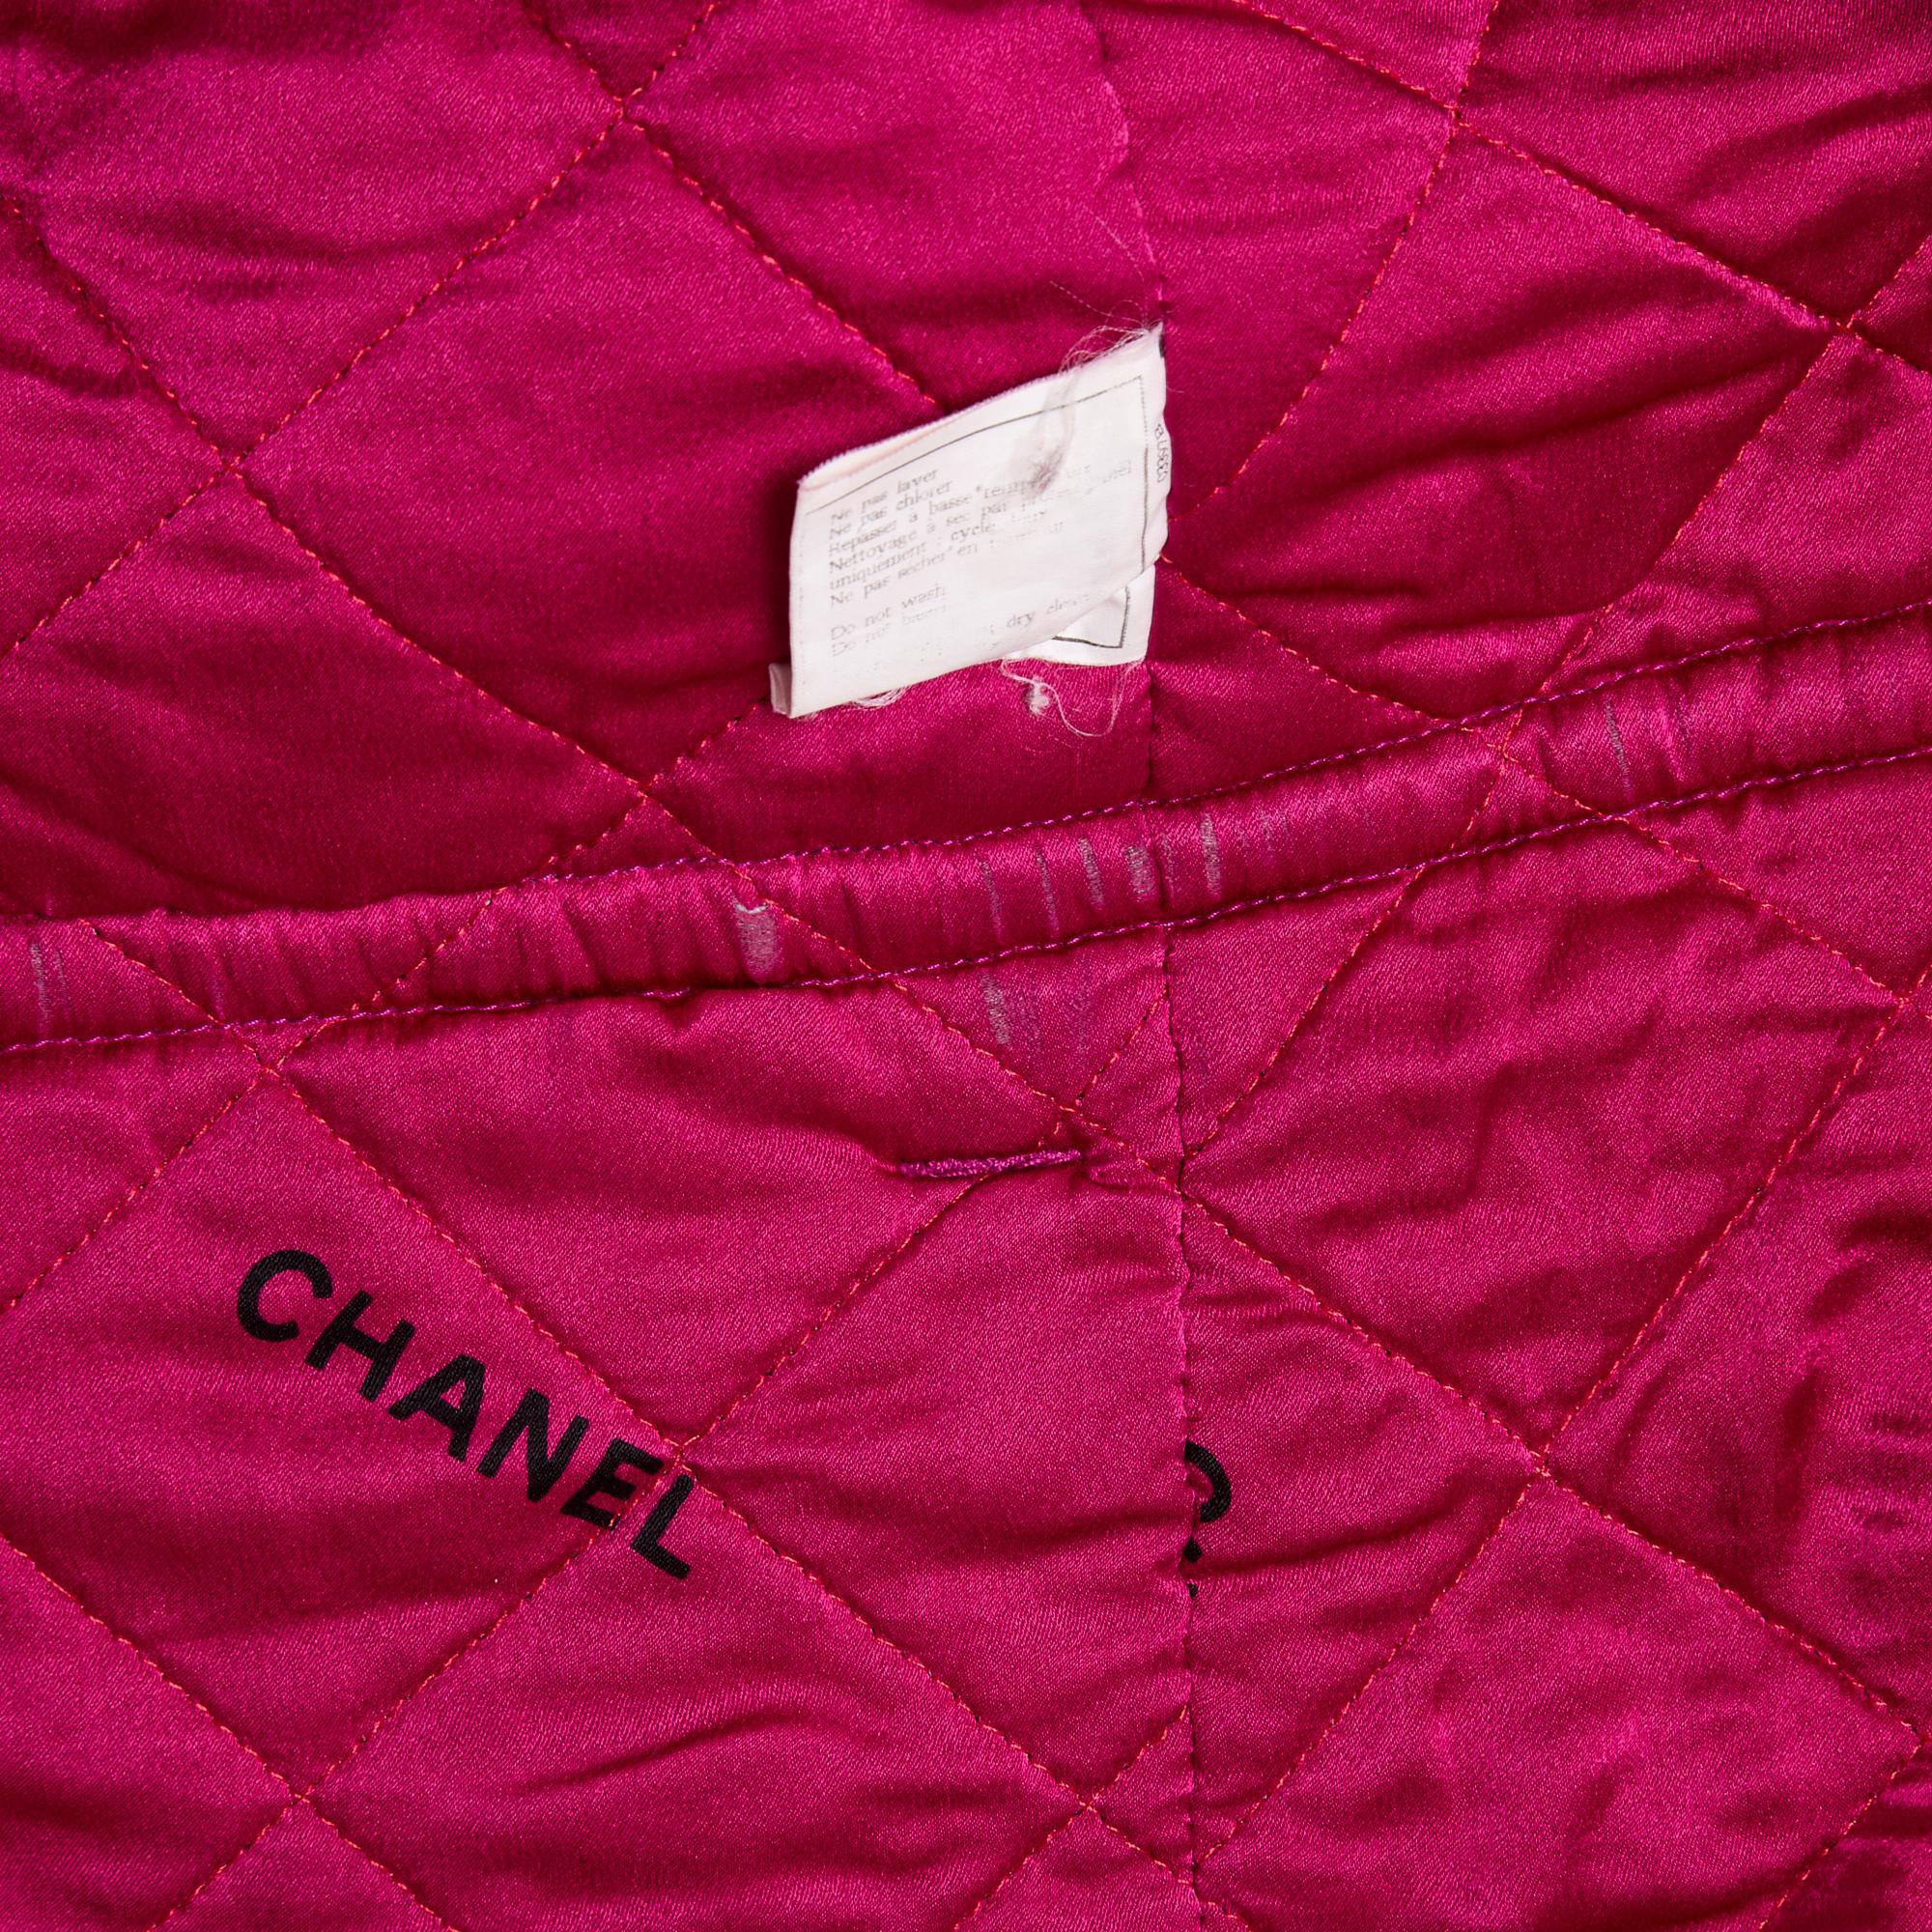 FW1994 Chanel Pink Silk Oversize Parka US8 to 12 For Sale 3